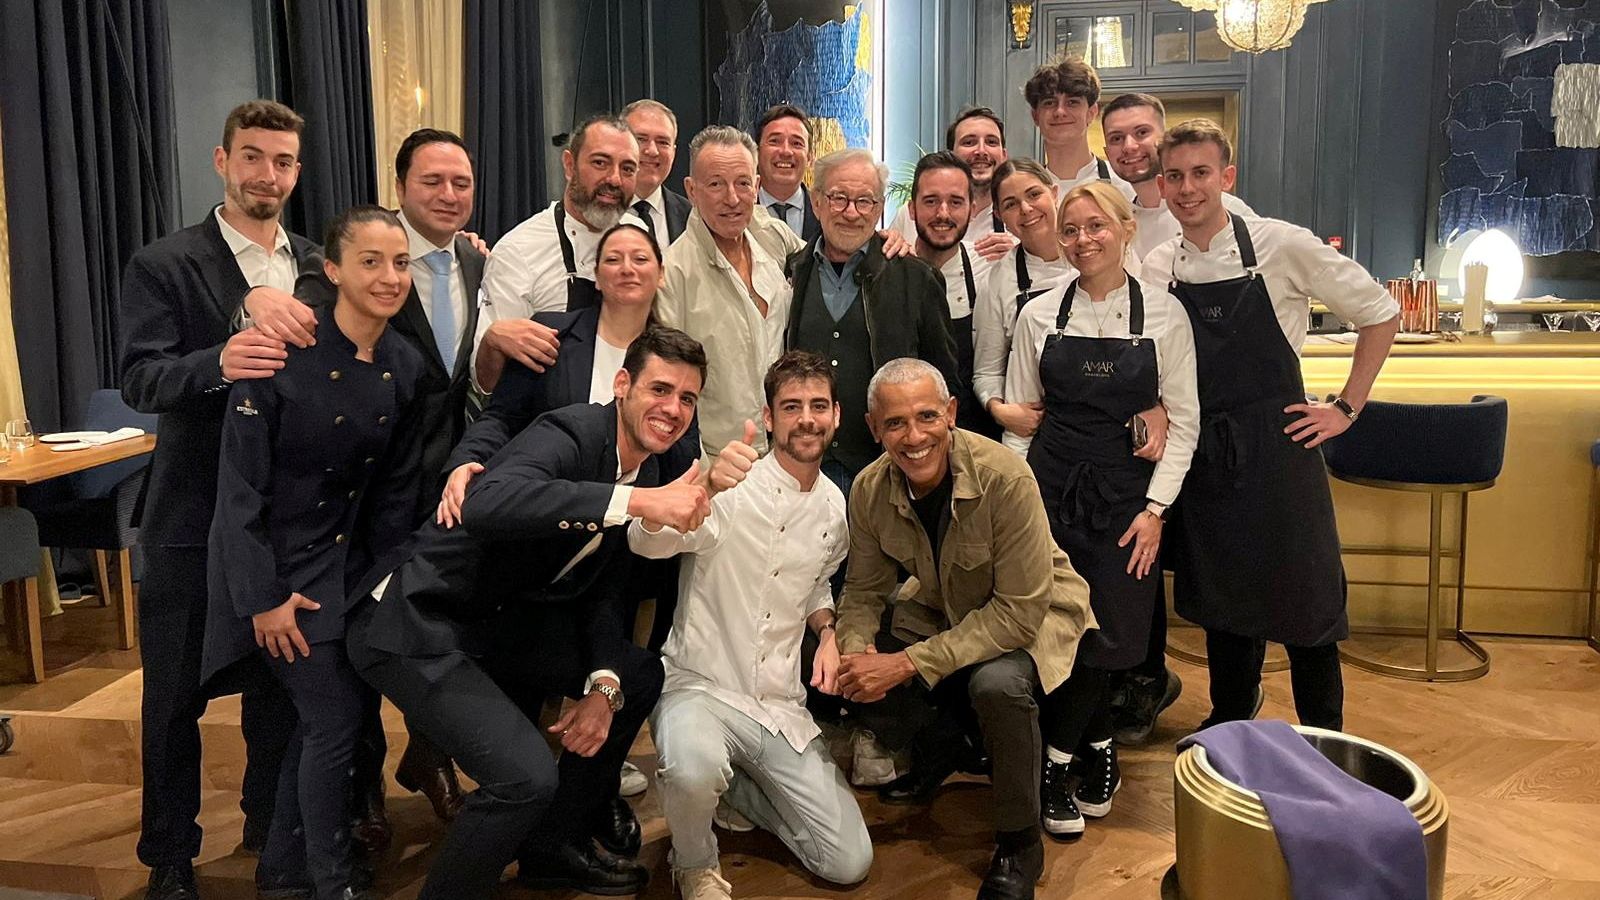 Barack Obama, Bruce Springsteen and Steven Spielberg wow restaurant staff with last-minute booking